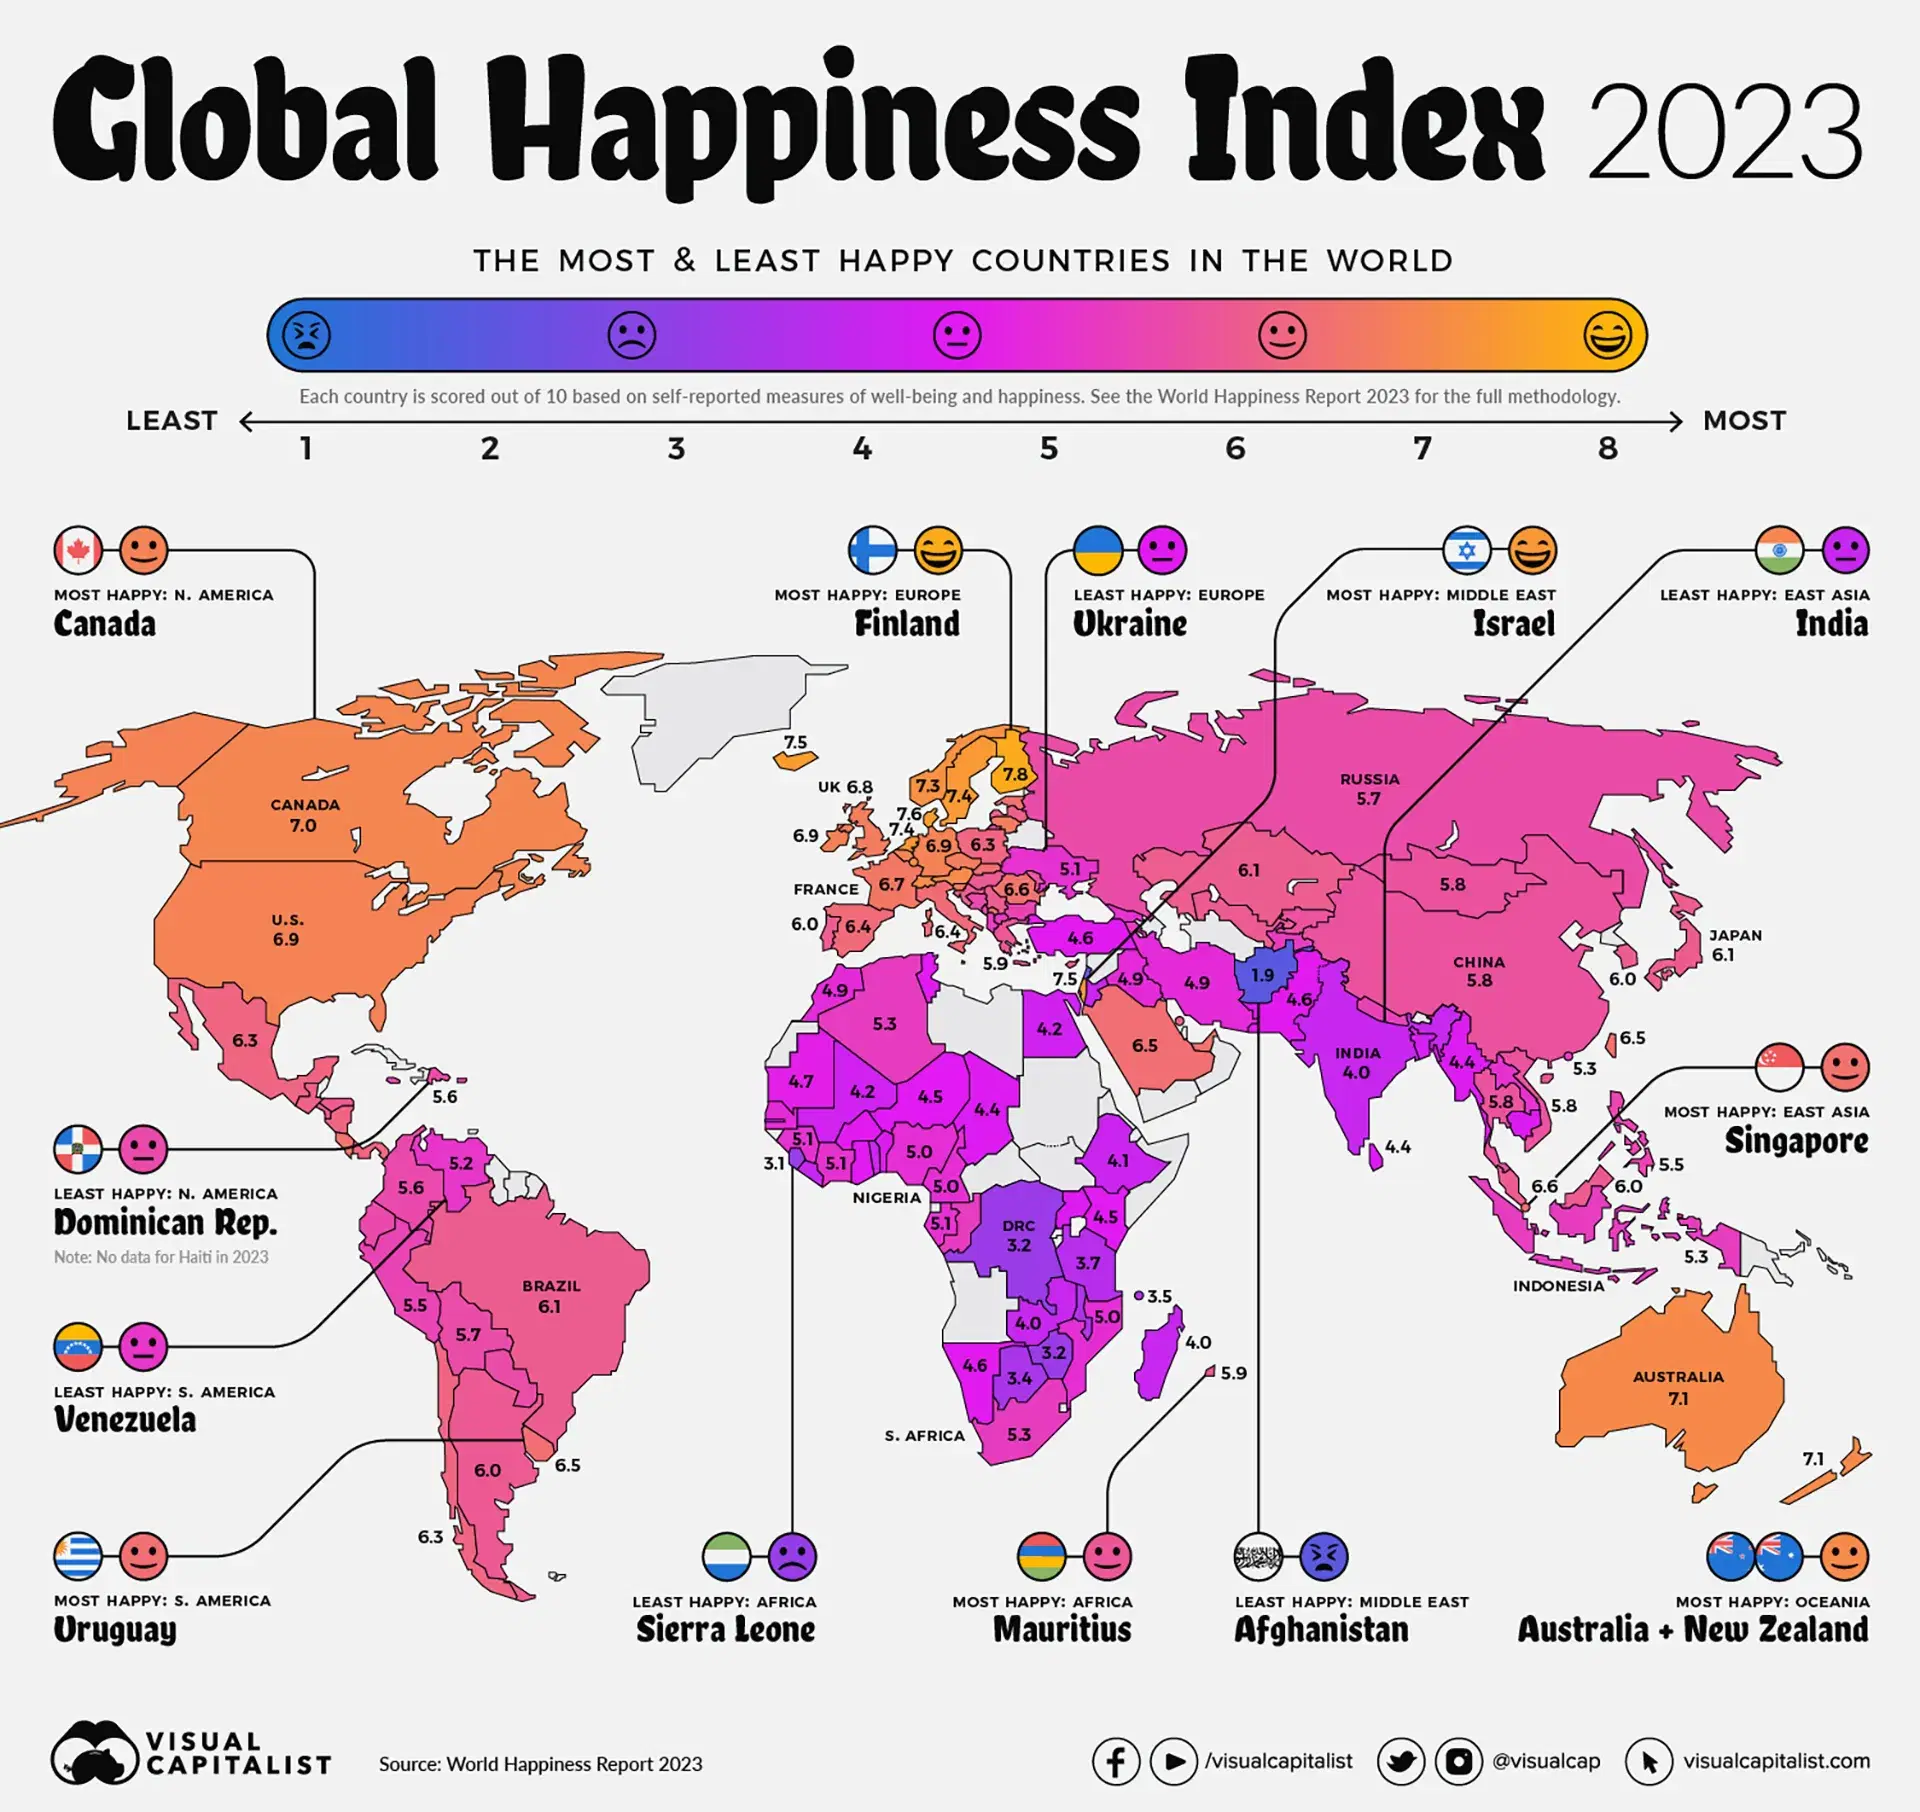 The World’s Happiest Countries in 2023